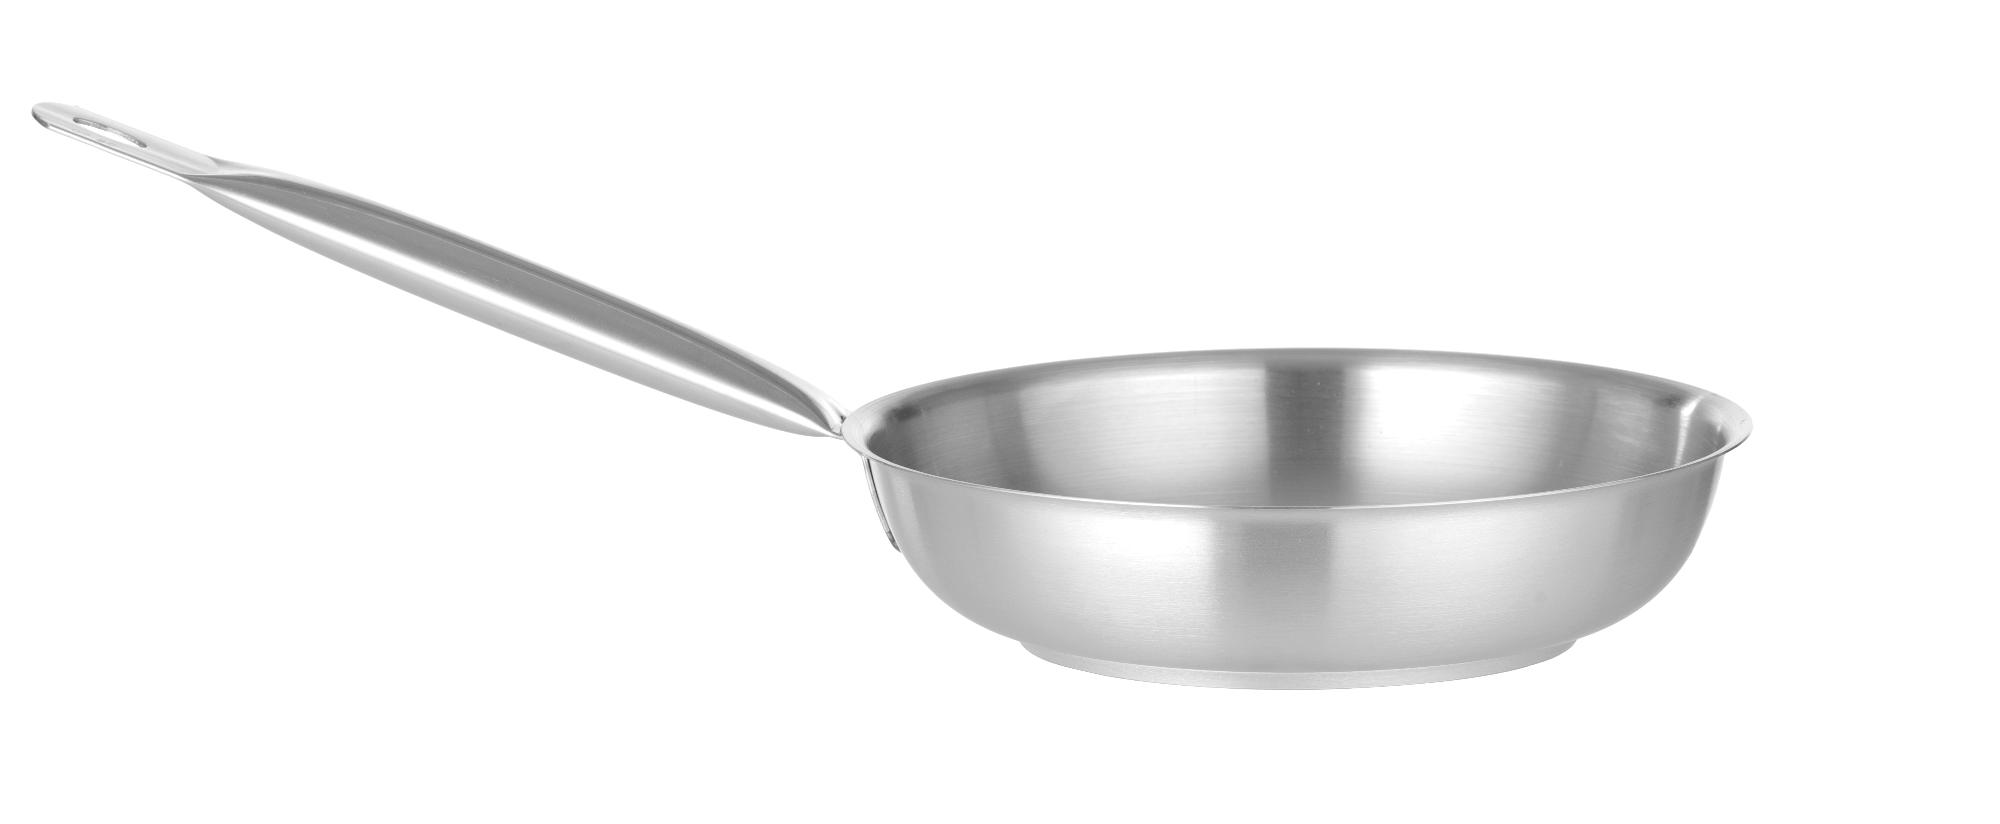 Stainless steel frying pan, 240mm